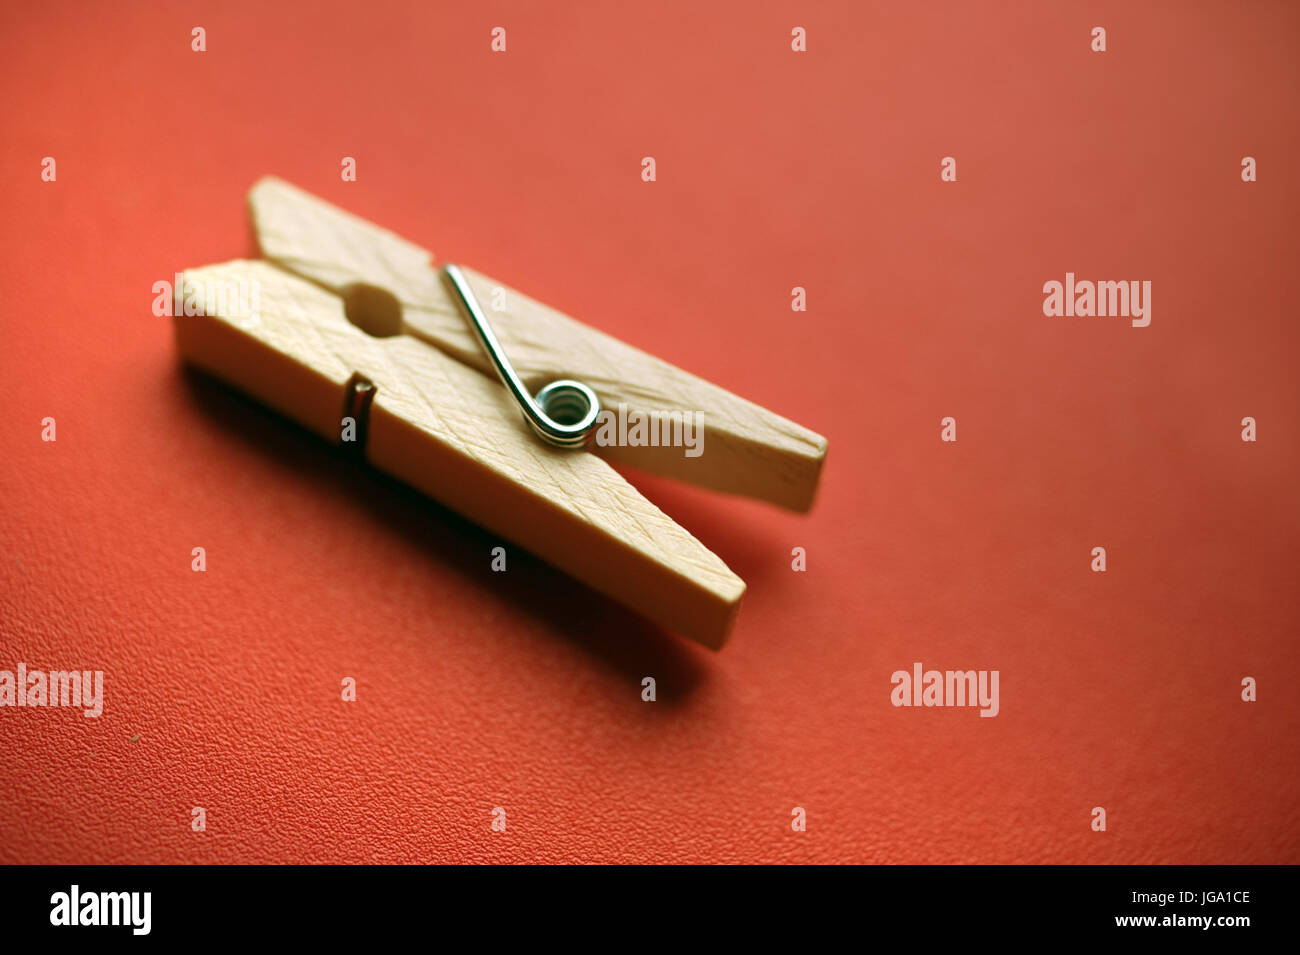 Wooden clothes peg on a red background Stock Photo